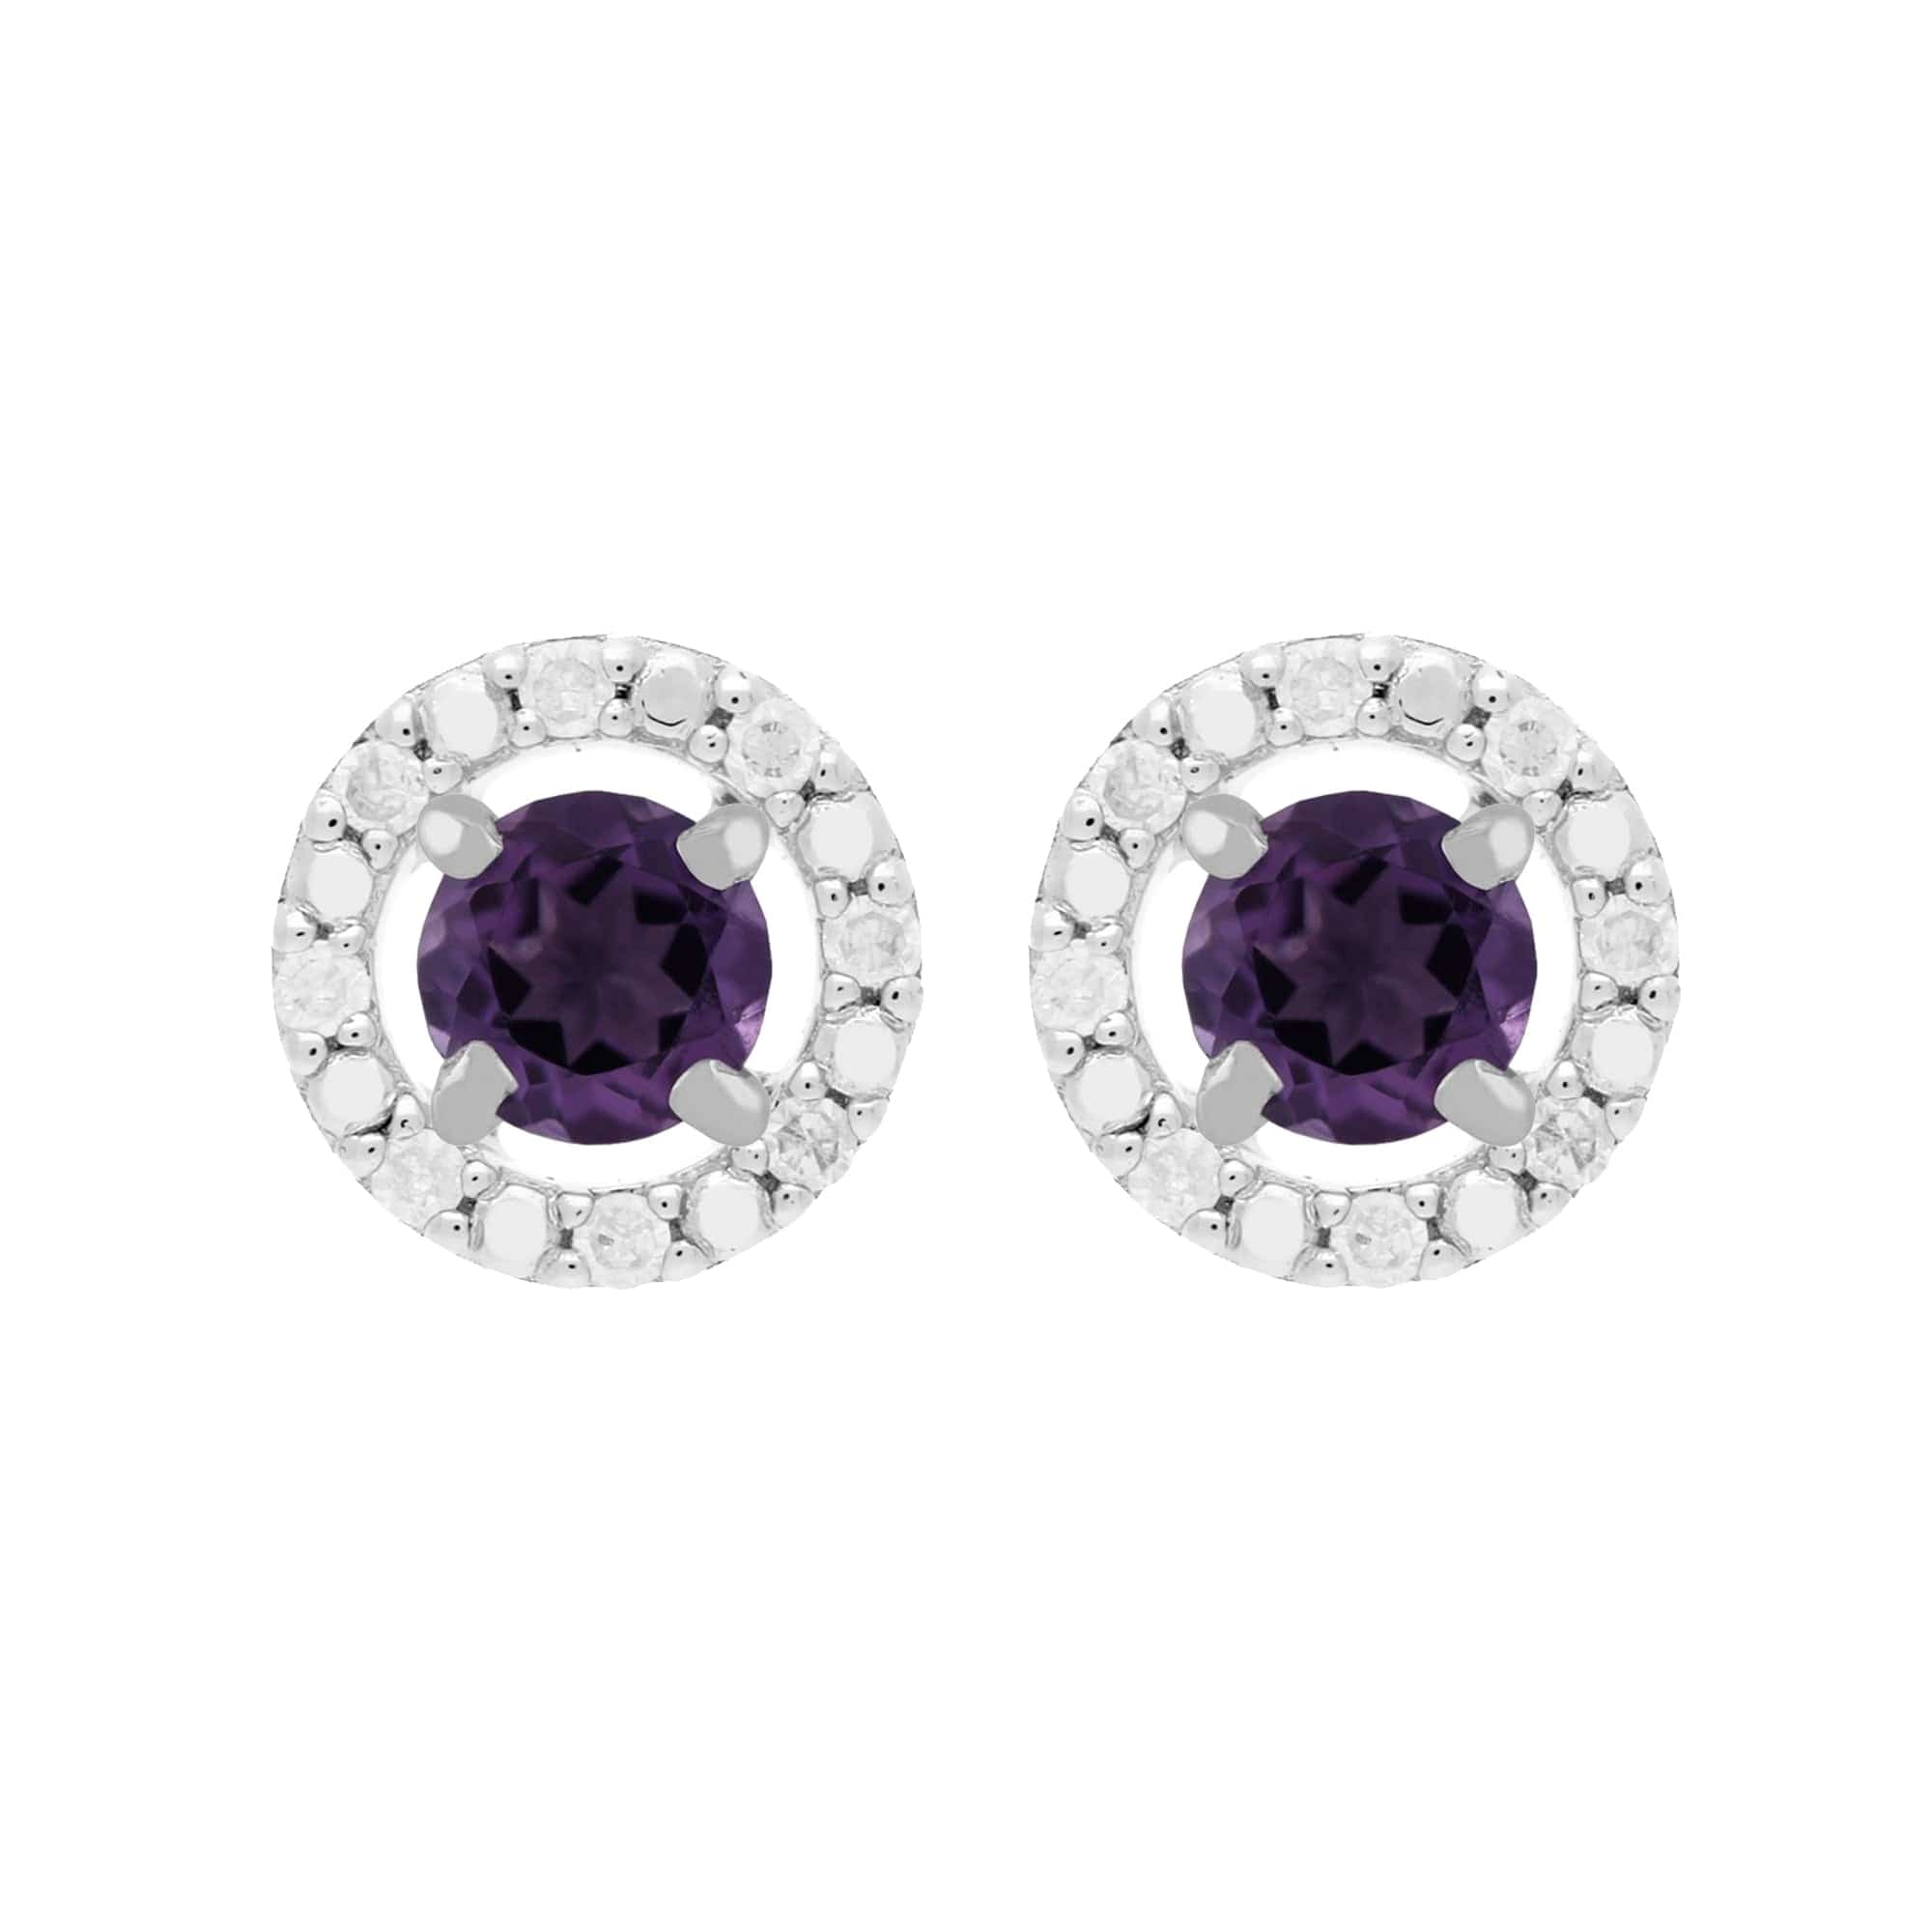 11612-162E0228019 Classic Round Amethyst Stud Earrings with Detachable Diamond Round Ear Jacket in 9ct White Gold 1